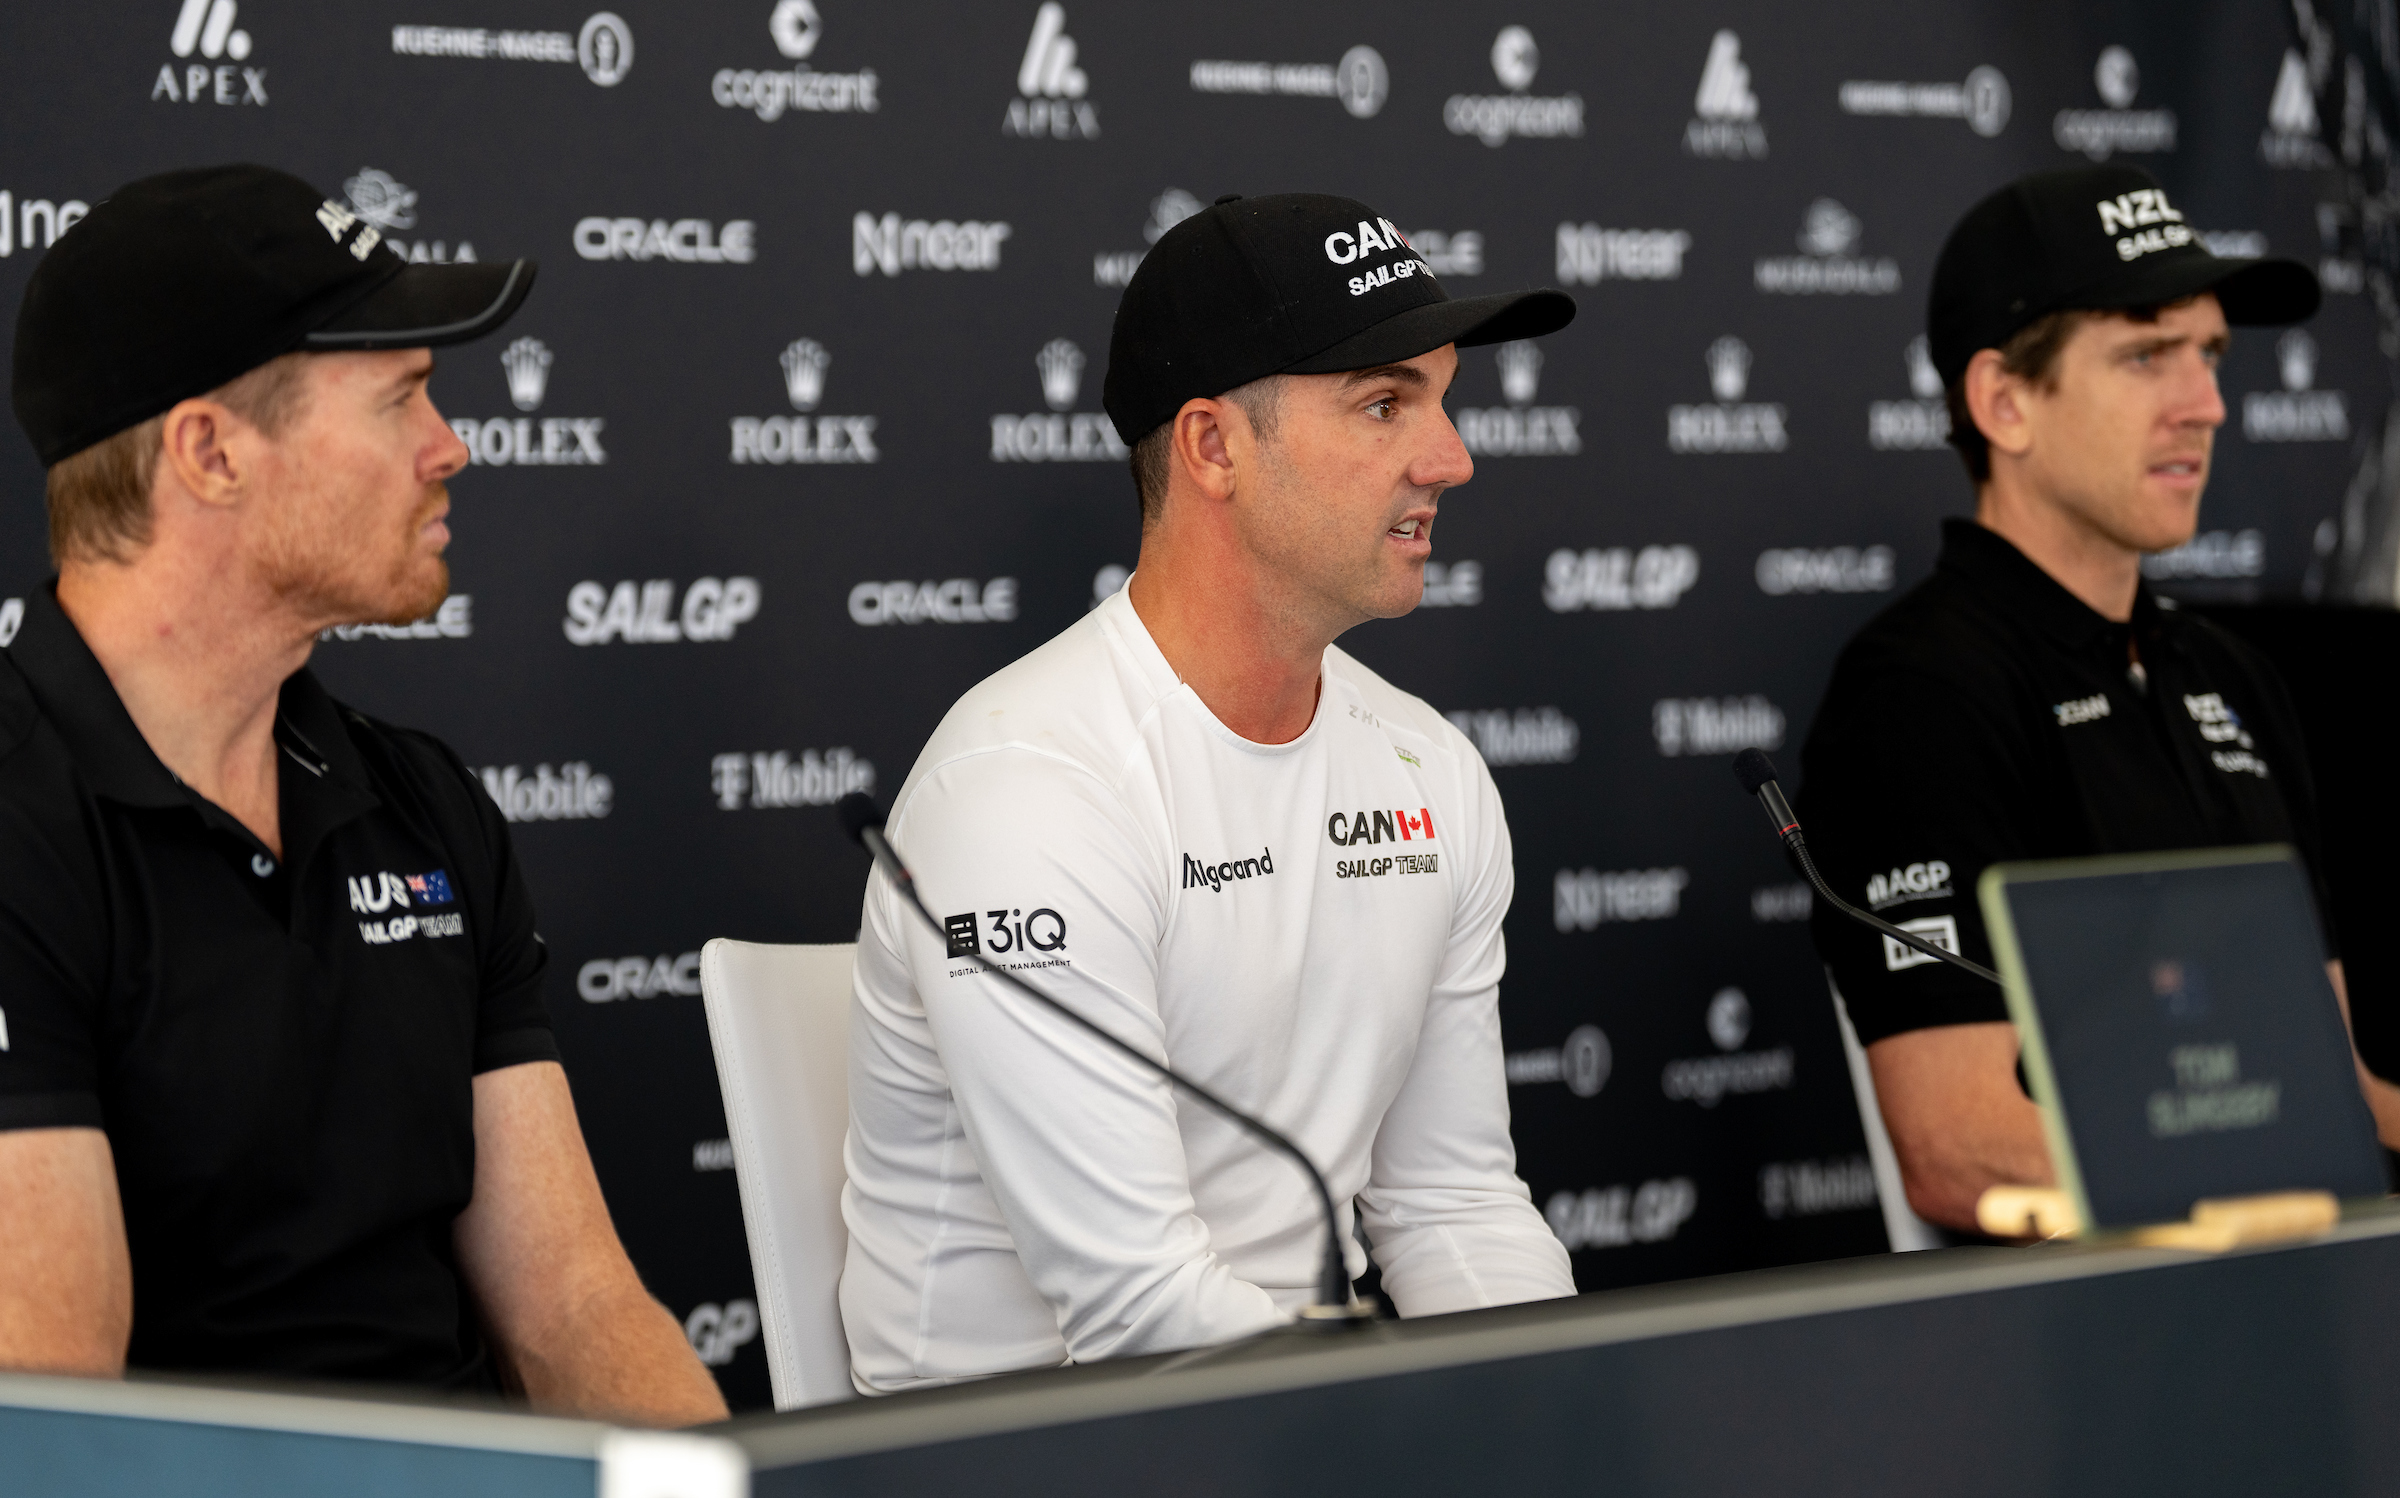 Season 4 // Los Angeles Sail Grand Prix // Phil Robertson at press conference with Burling and Slingsby